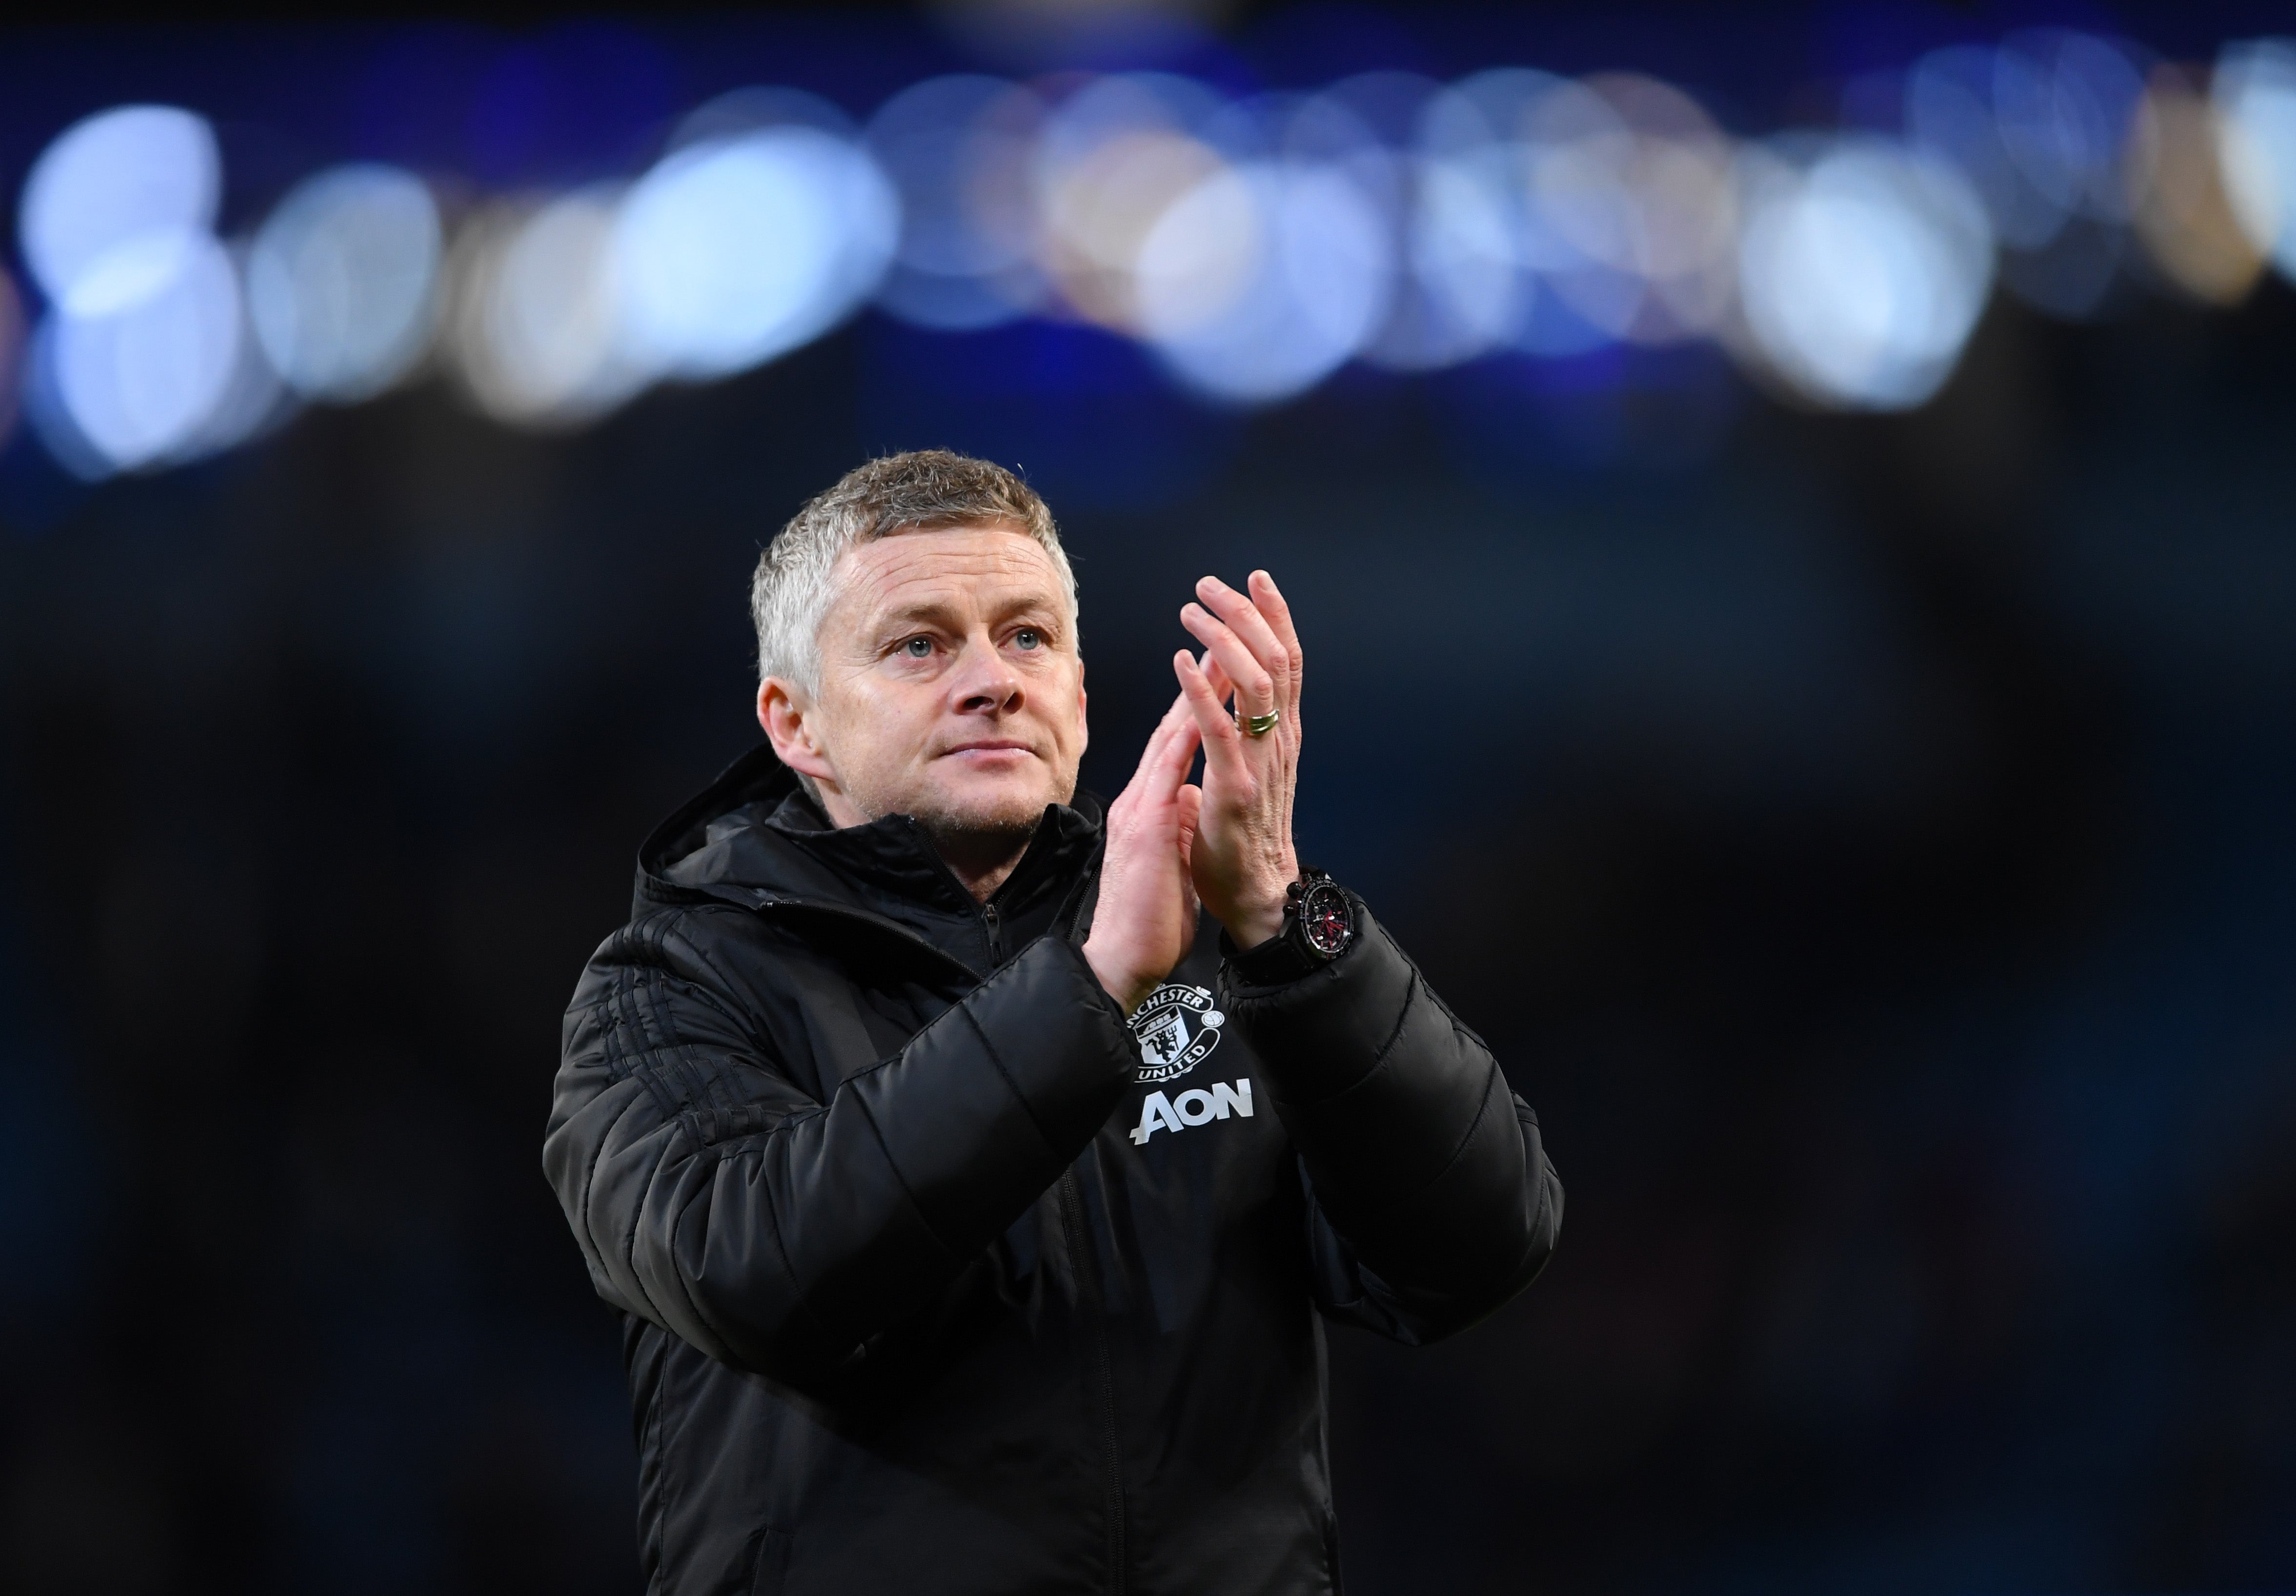 Ole Gunnar Solskjaer is aiming to win his first trophy at the club this season